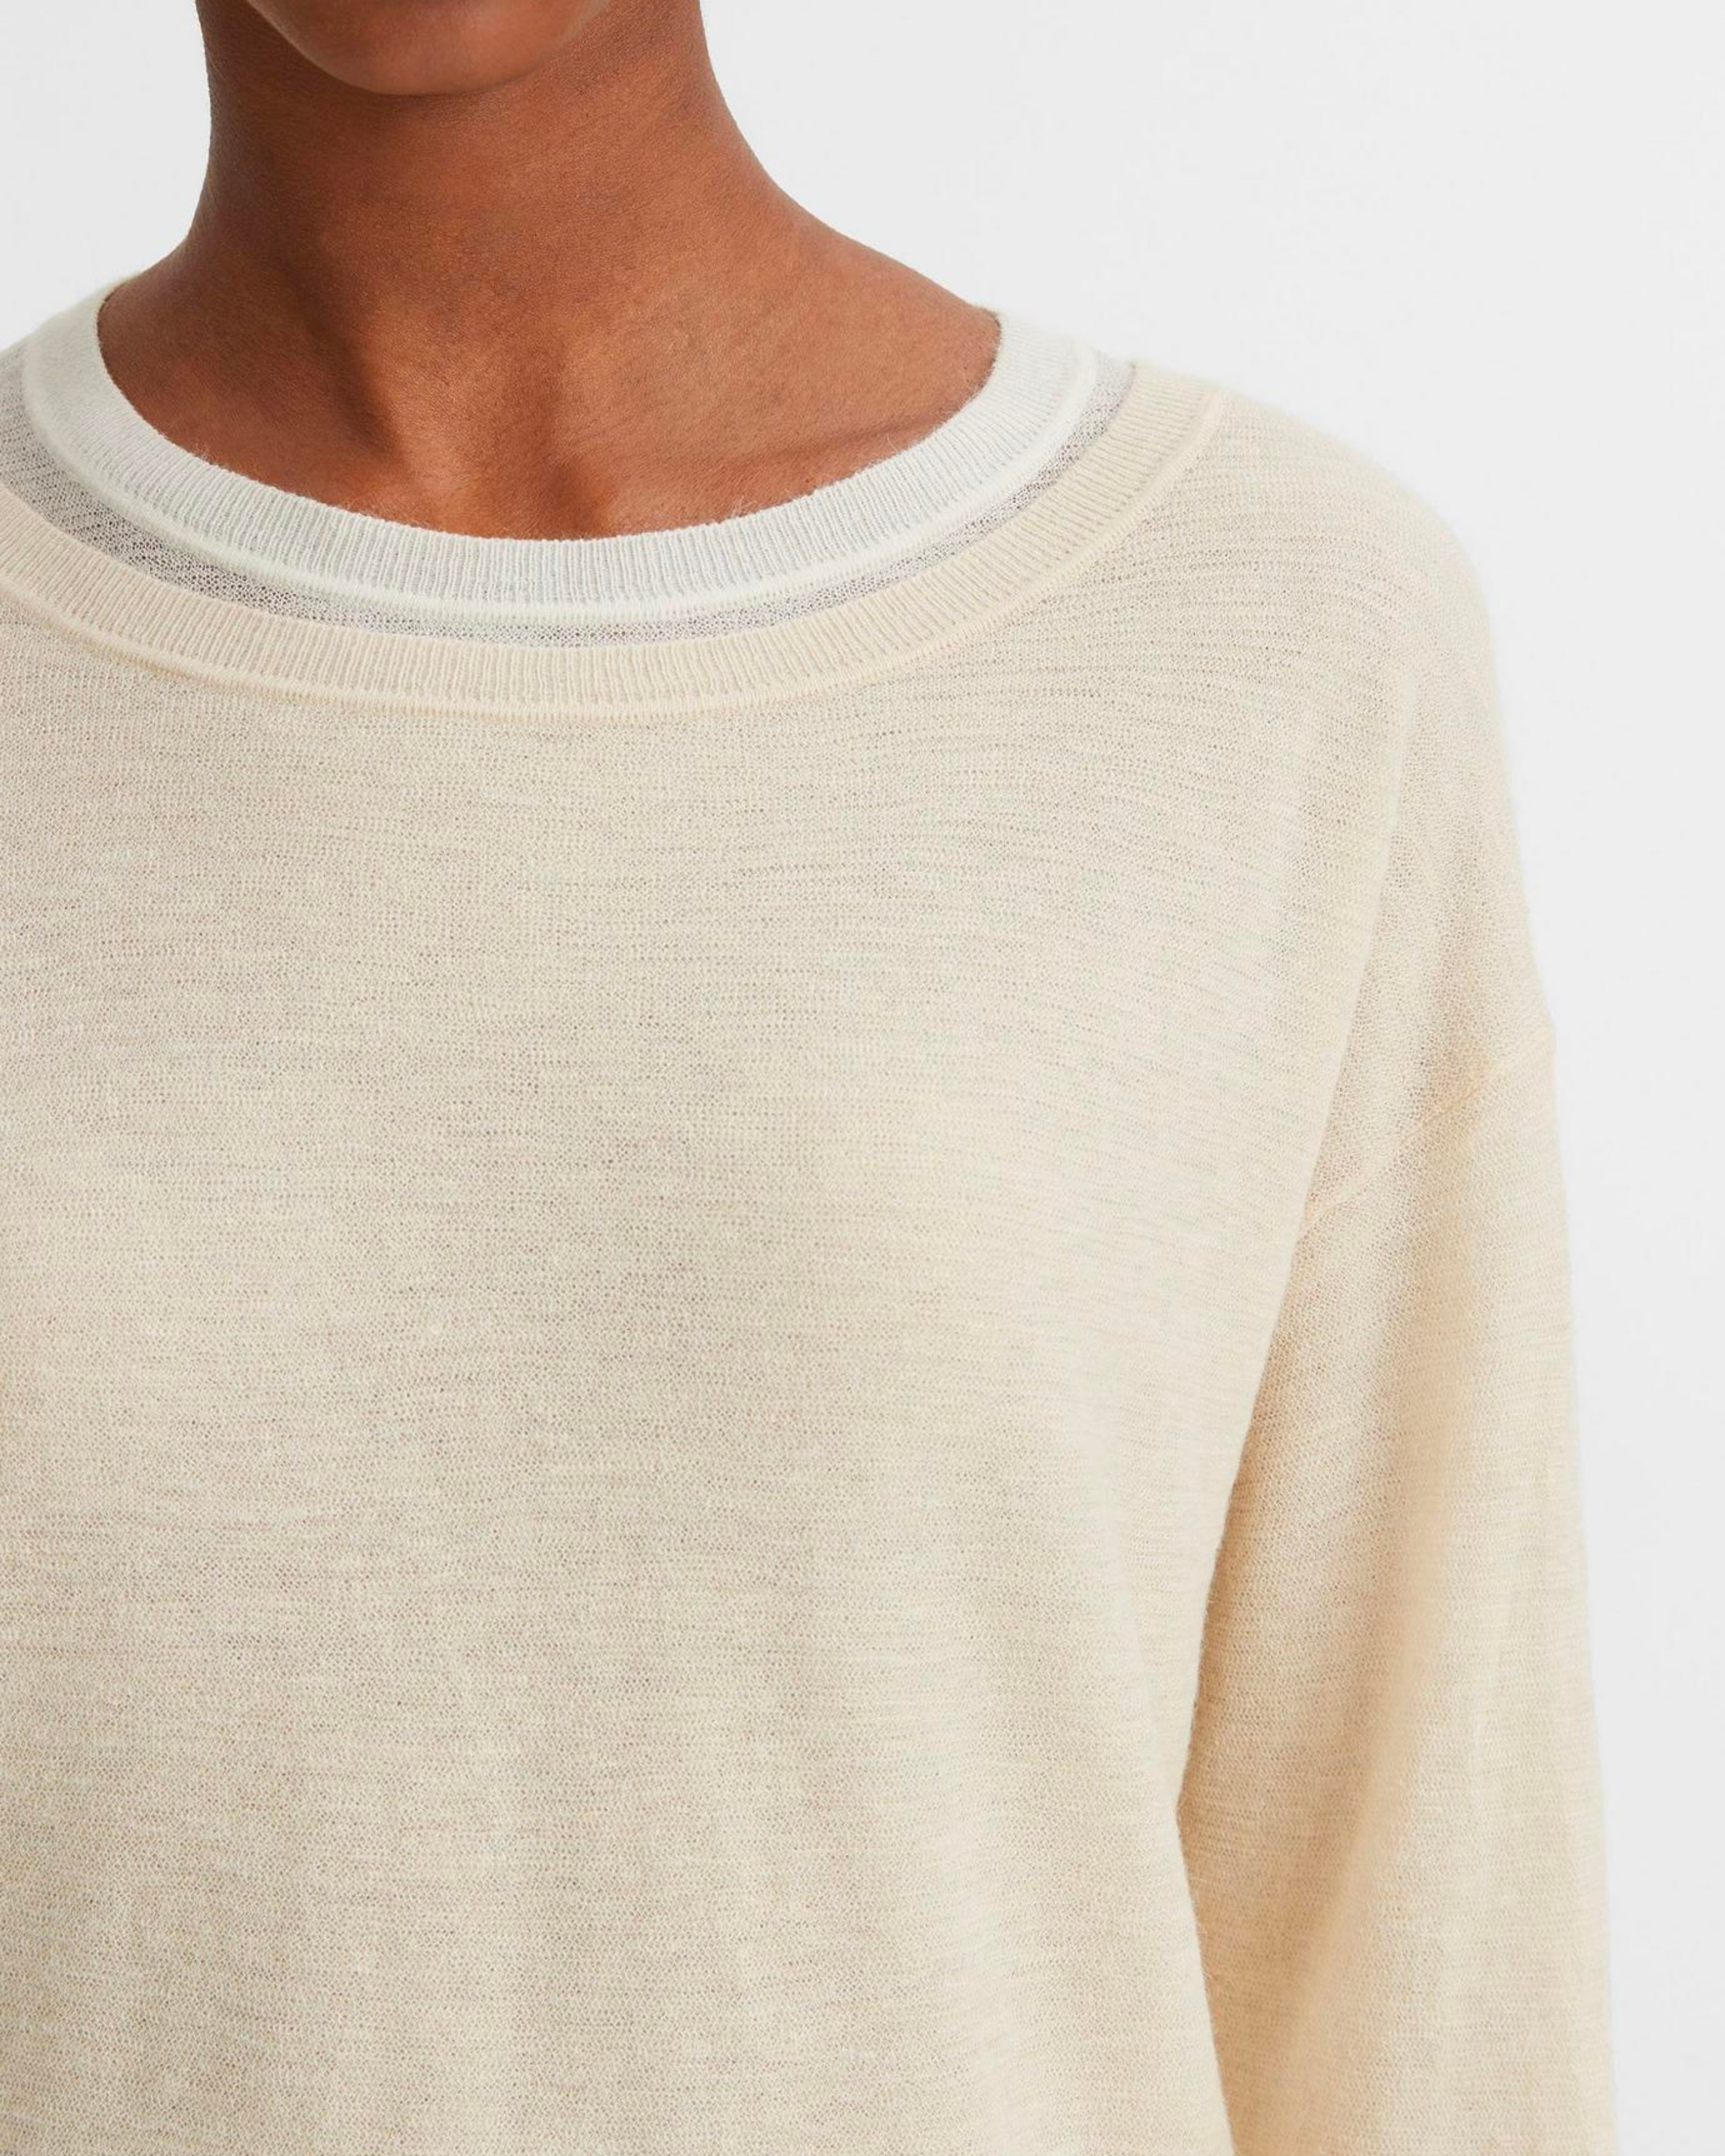 Vince Double Layer Sweater in White Sand